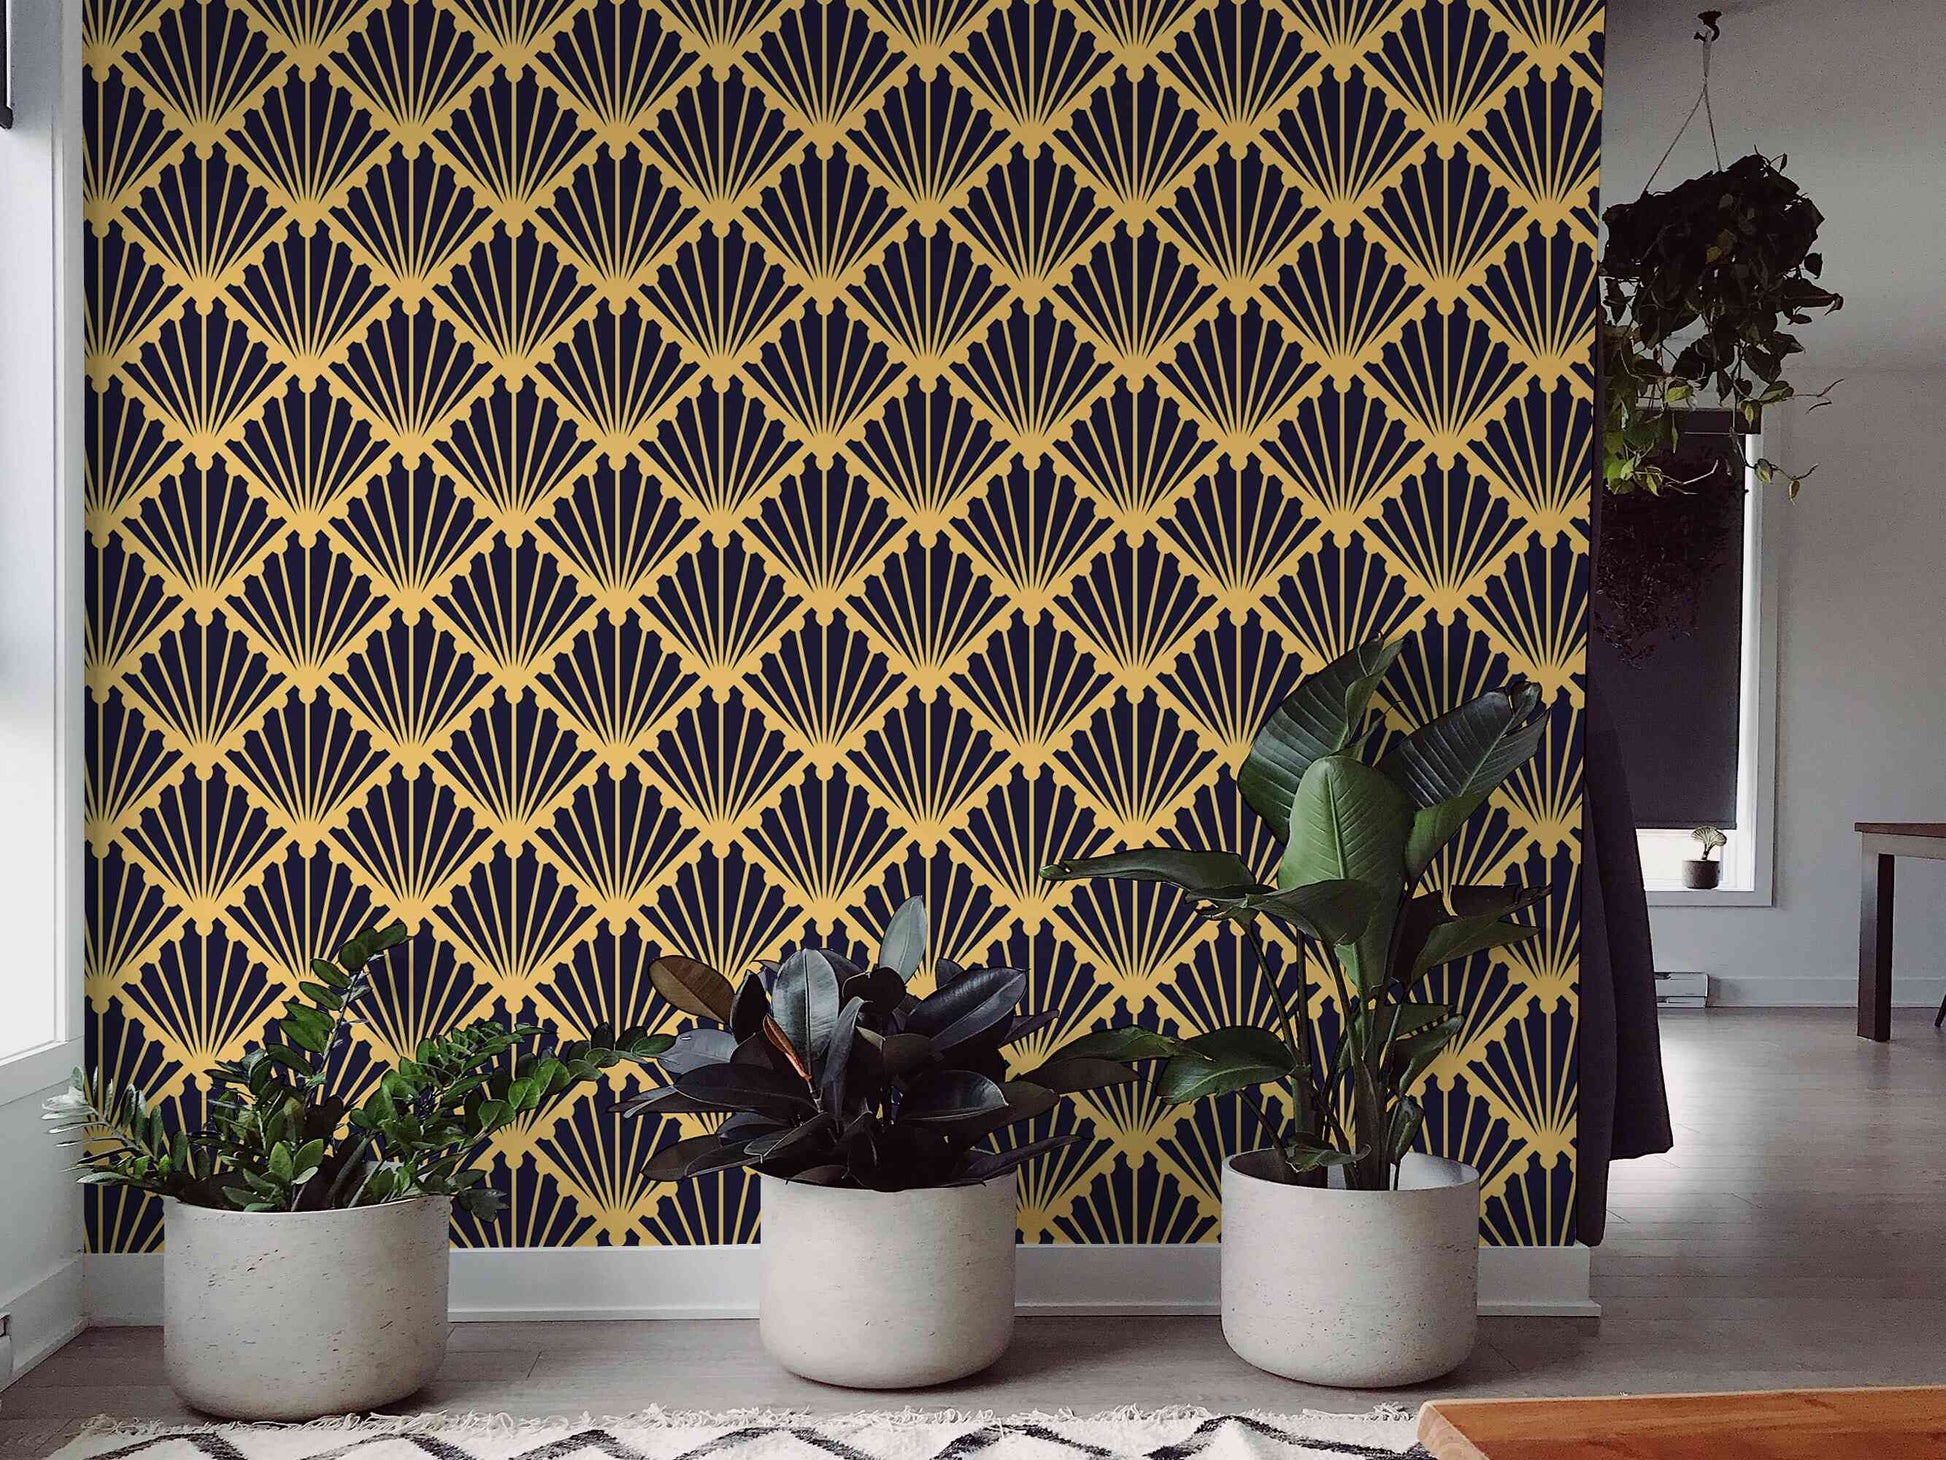 Luxury black with gold murals wallpaper adding elegance to any space.